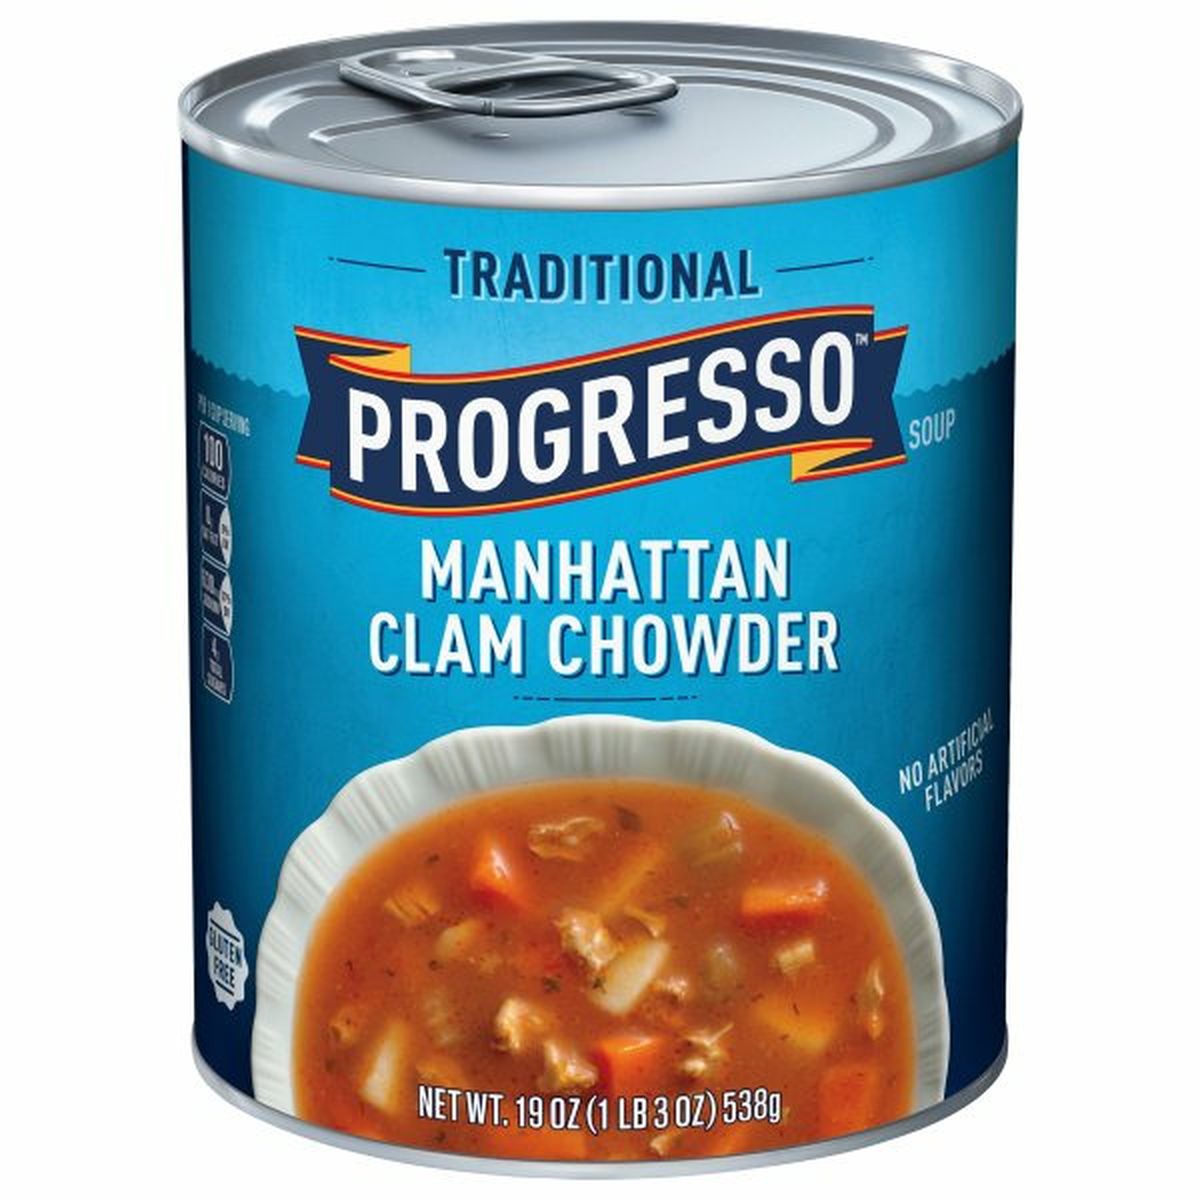 Calories in Progresso Soup, Manhattan Clam Chowder, Traditional